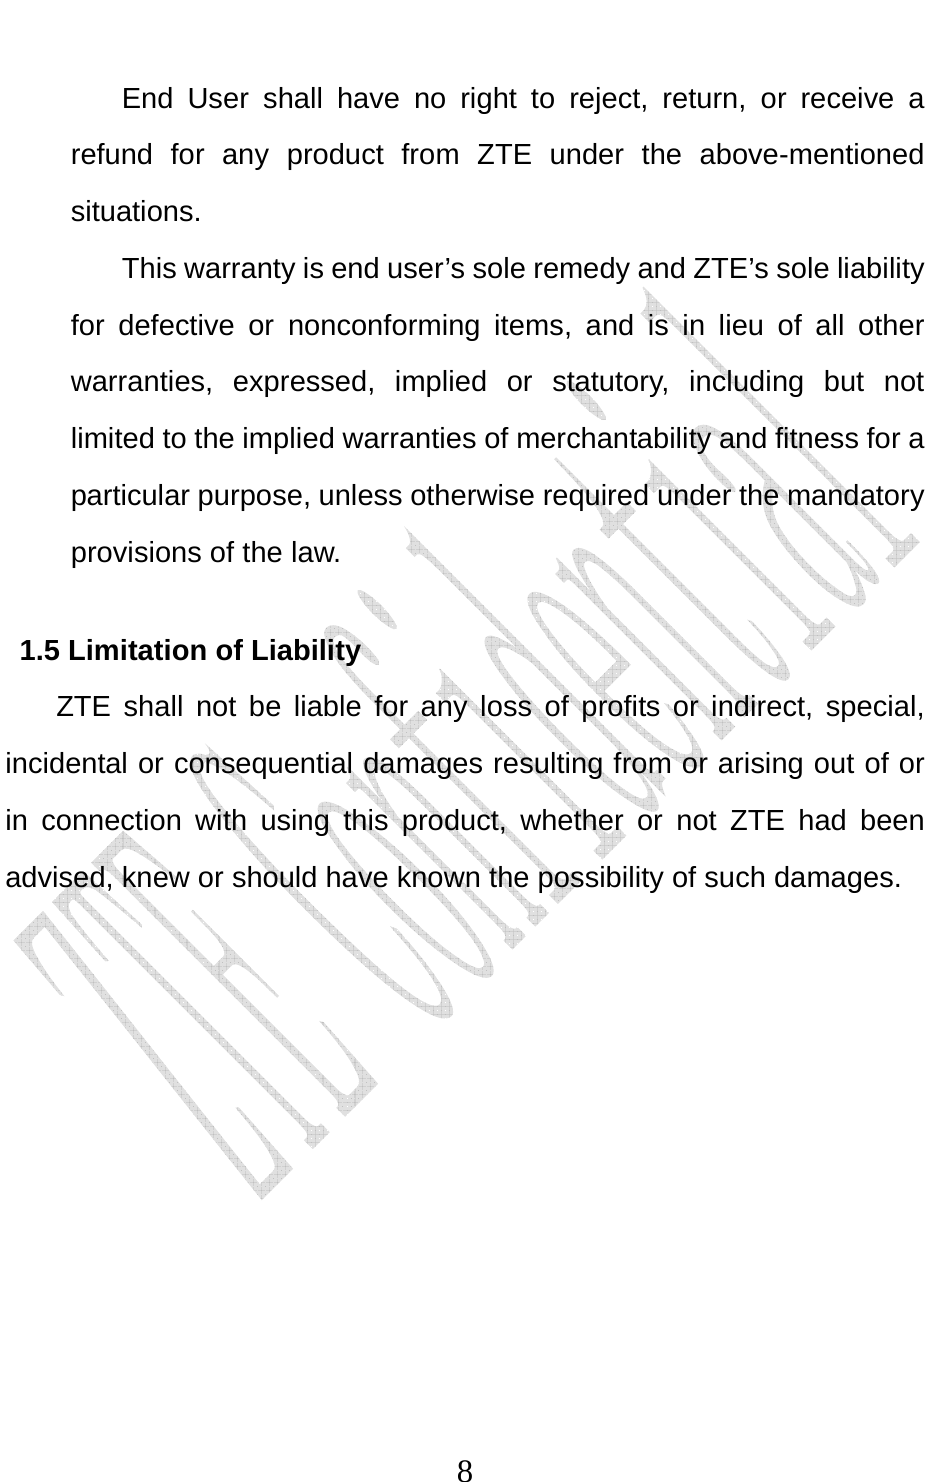                              8End User shall have no right to reject, return, or receive a refund for any product from ZTE under the above-mentioned situations. This warranty is end user’s sole remedy and ZTE’s sole liability for defective or nonconforming items, and is in lieu of all other warranties, expressed, implied or statutory, including but not limited to the implied warranties of merchantability and fitness for a particular purpose, unless otherwise required under the mandatory provisions of the law.   1.5 Limitation of Liability ZTE shall not be liable for any loss of profits or indirect, special, incidental or consequential damages resulting from or arising out of or in connection with using this product, whether or not ZTE had been advised, knew or should have known the possibility of such damages. 